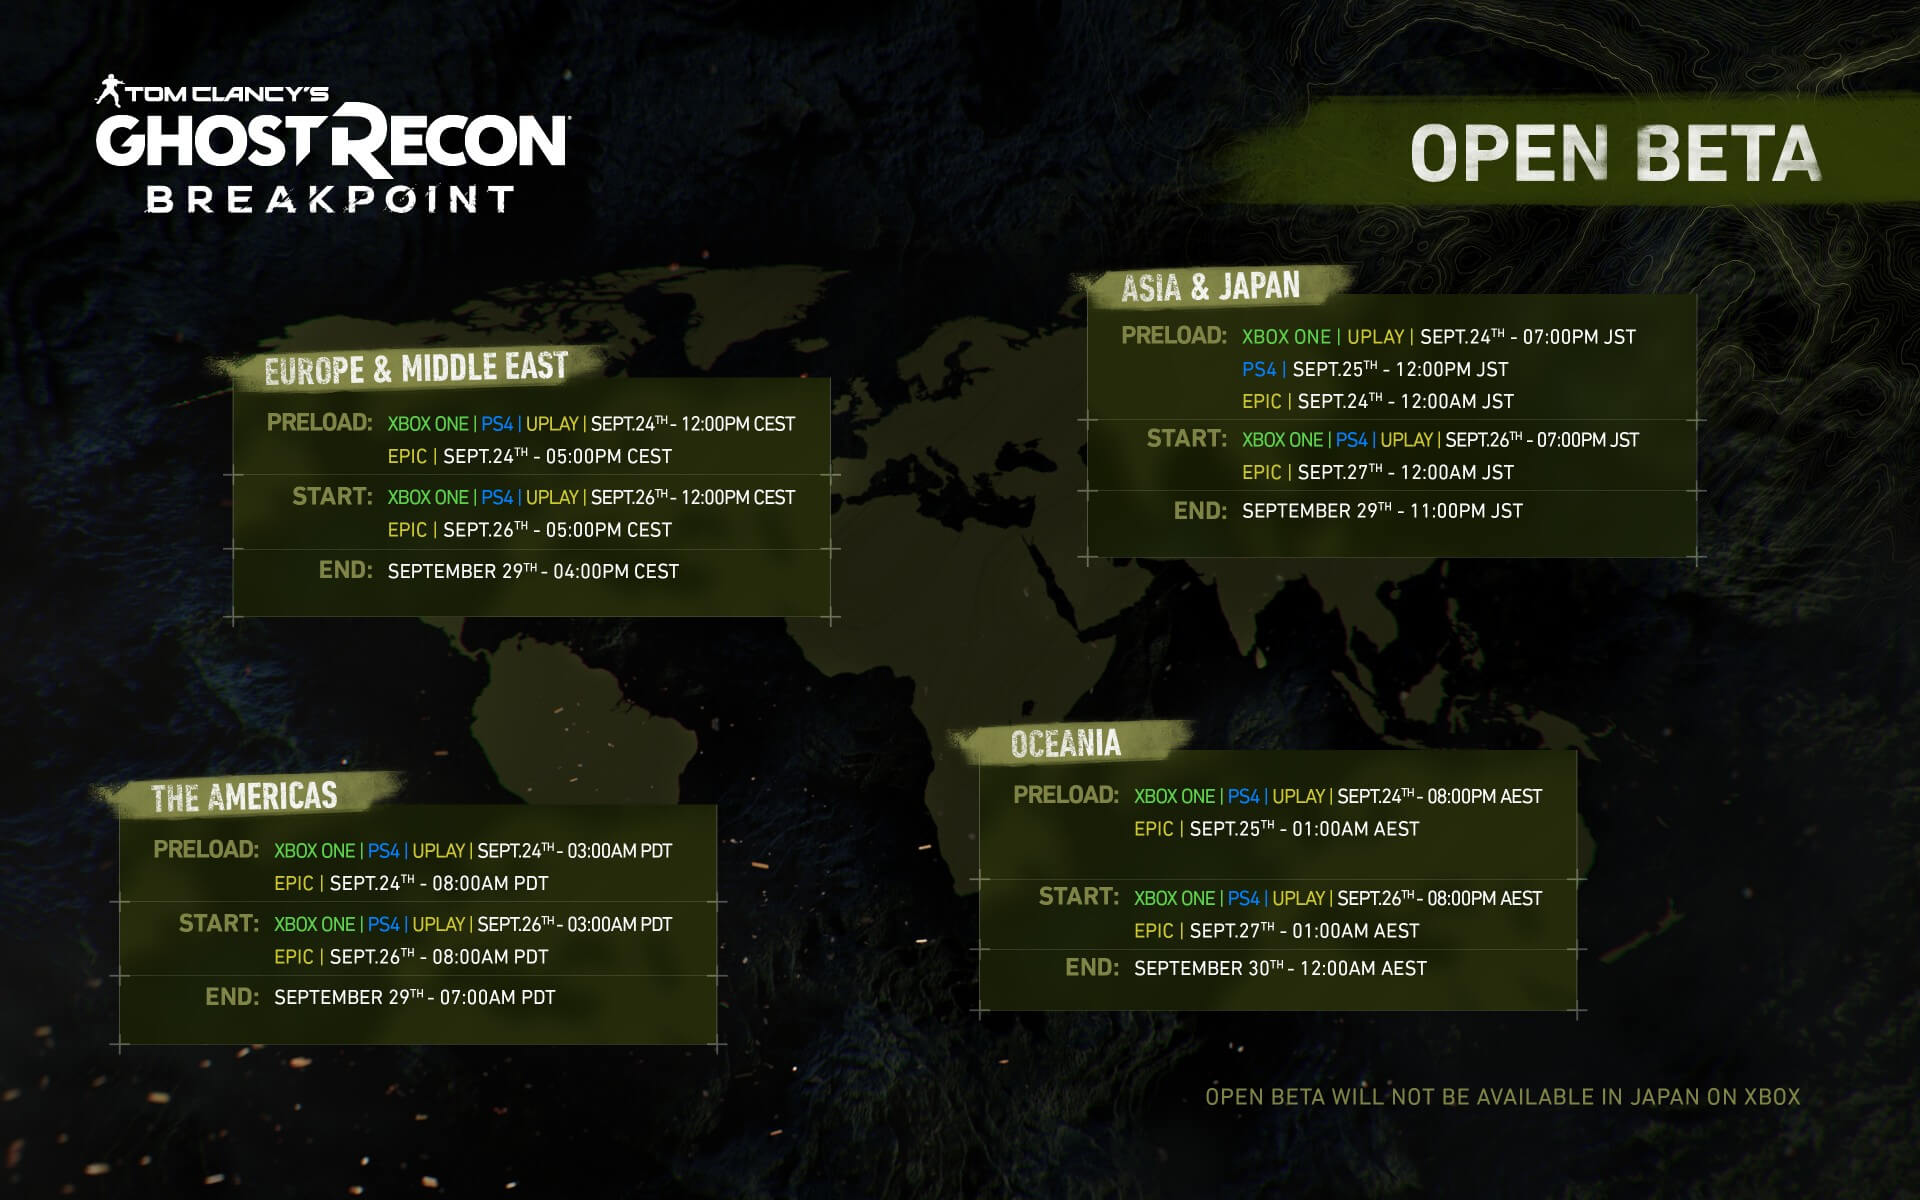 Ghost Recon Beta Times